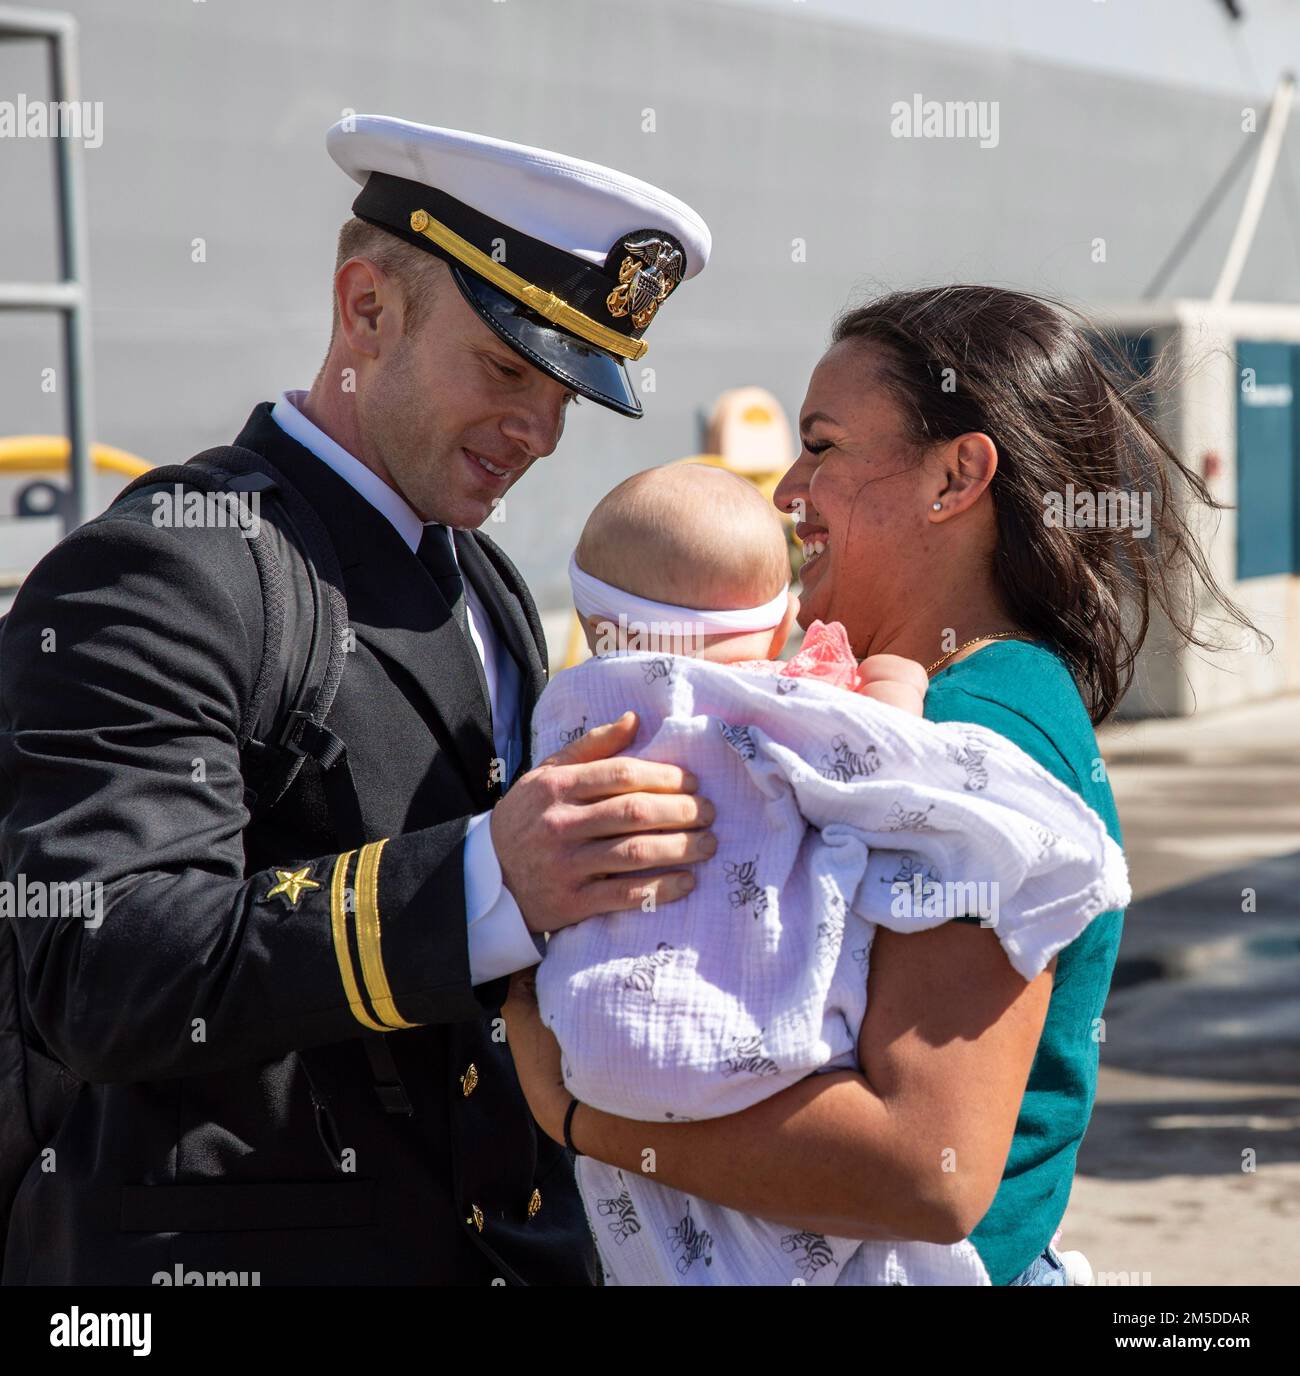 220304-N-LR905-2163  SAN DIEGO (March 4, 2022) – Lt. j.g. Mather, currently assigned to amphibious transport dock ship USS Portland (LPD 27), embraces his child for the first time March 4. Portland, a part of the Essex Amphibious Ready Group, returned to Naval Base San Diego March 4 after a deployment to U.S. 3rd, 5th, and 7th Fleets in support of regional stability and a free and open Indo-Pacific. Stock Photo